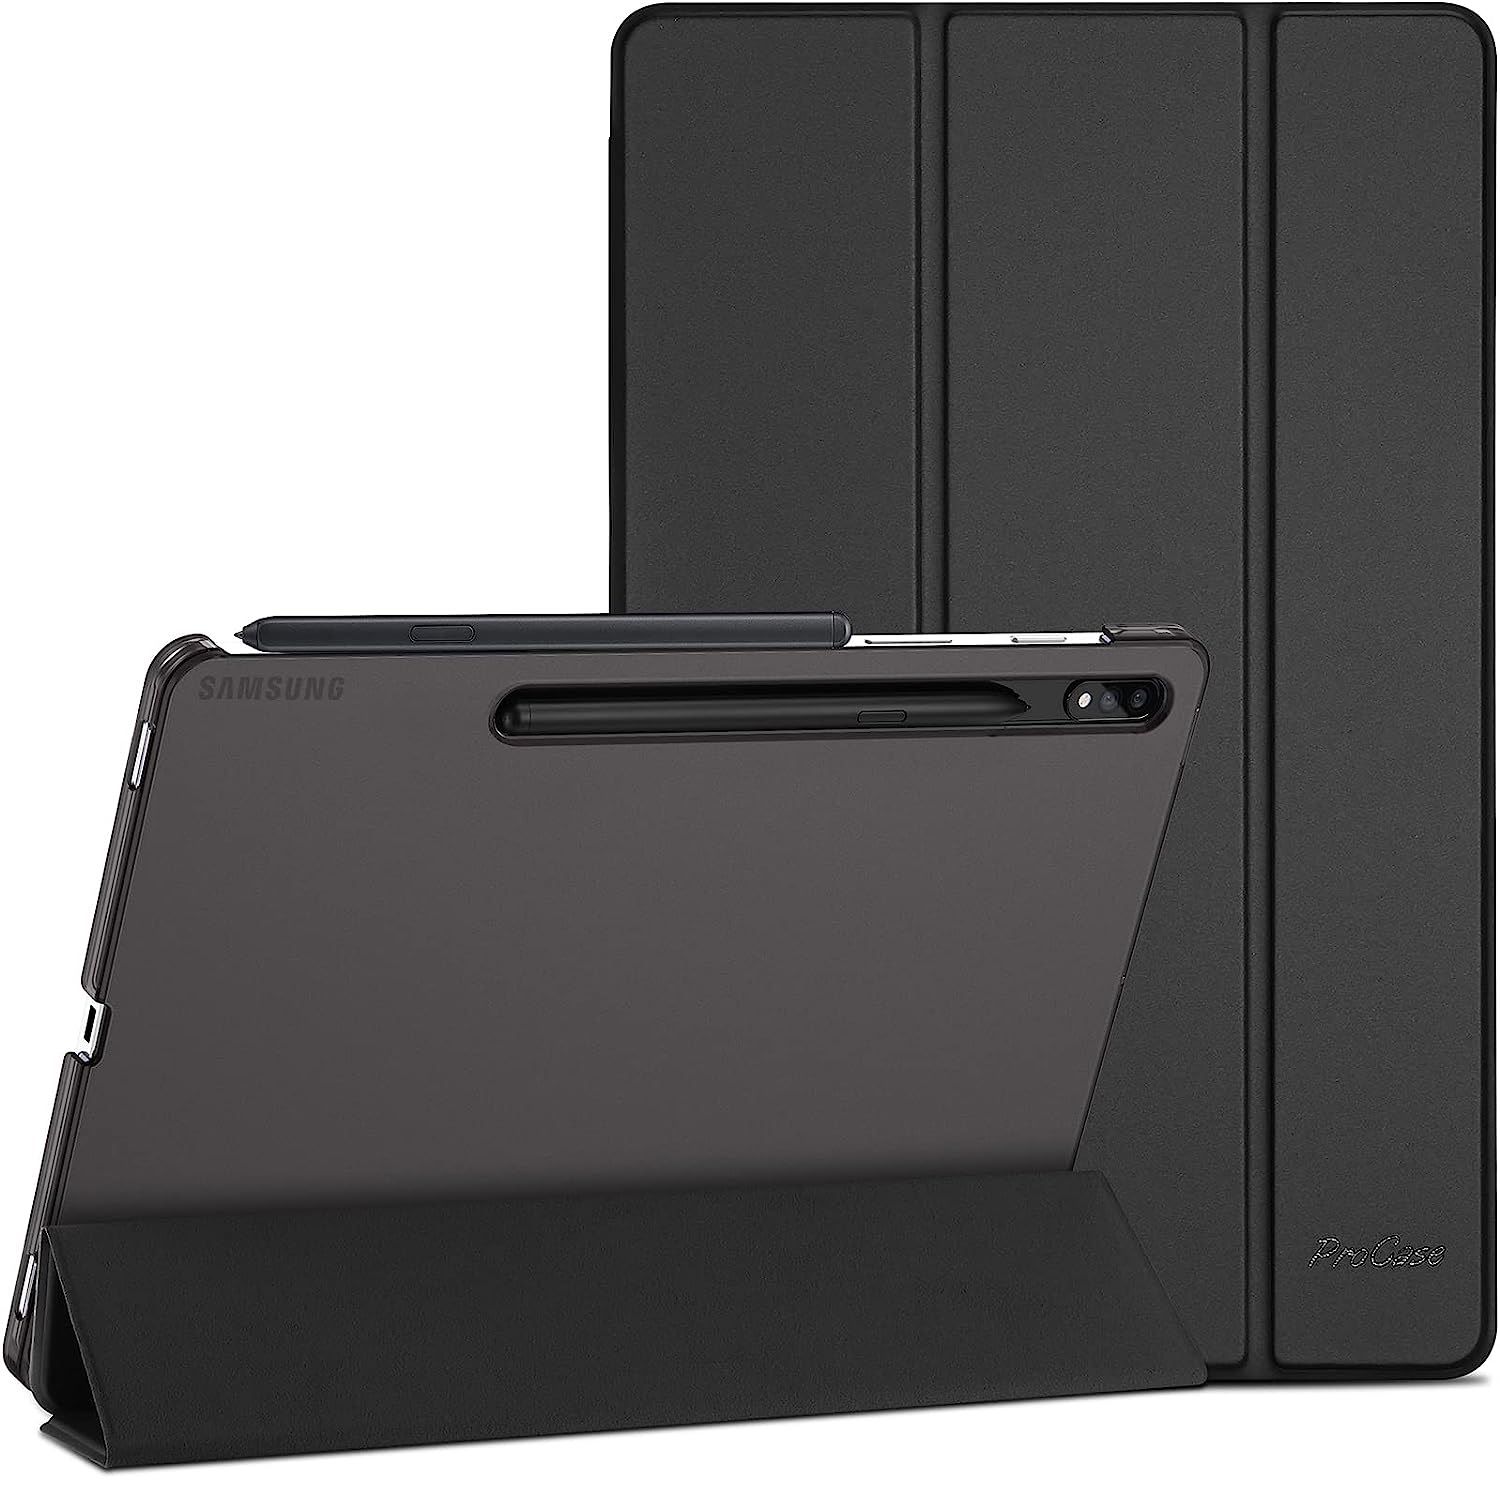 ProCase Cover for Galaxy Tab S8 shown from the rear in both portrait and landscape orientation